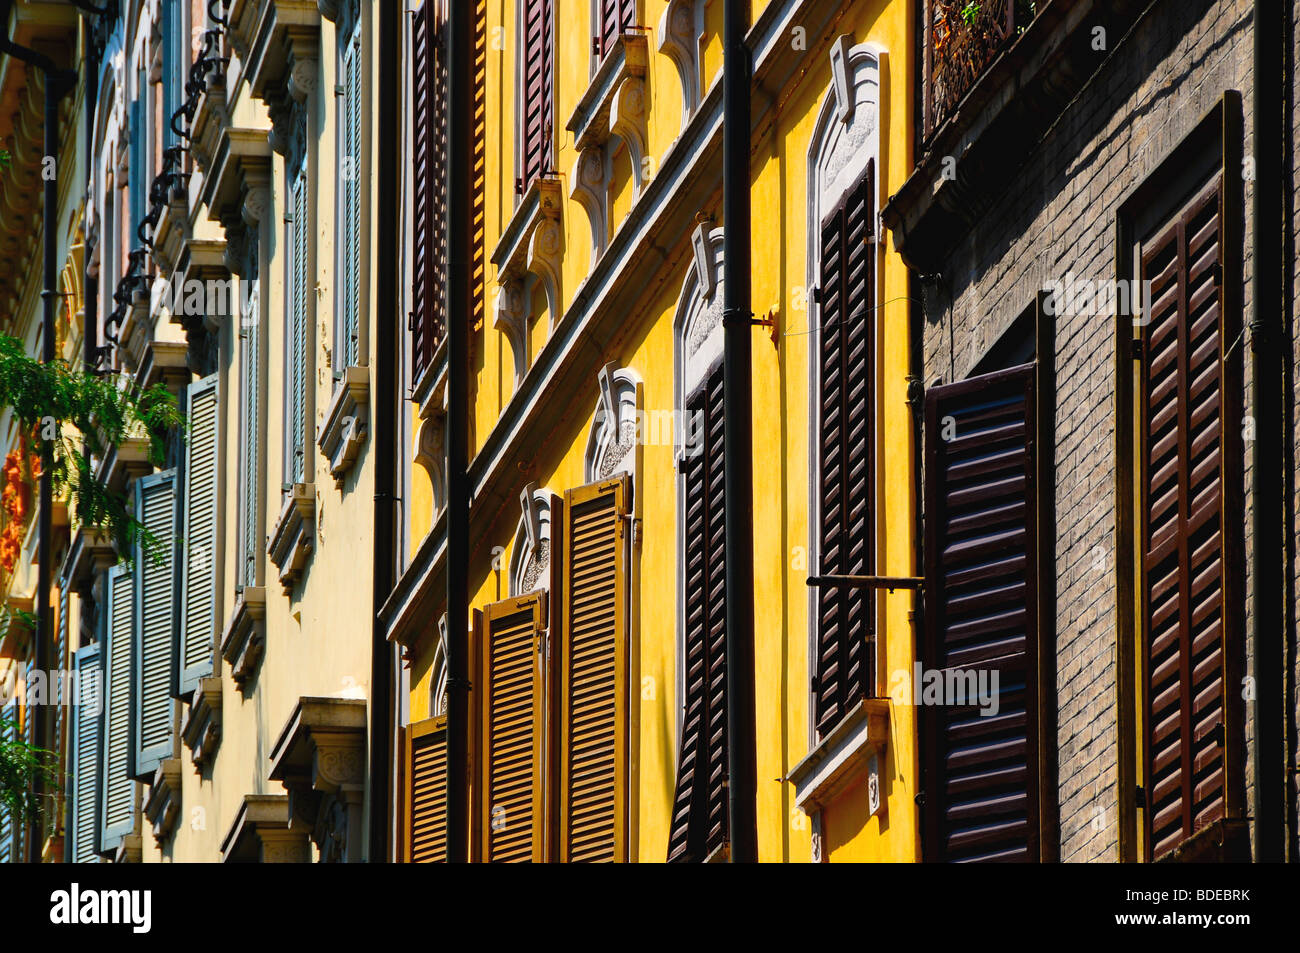 Wooden shutters on buildings in Modena, Italy Stock Photo